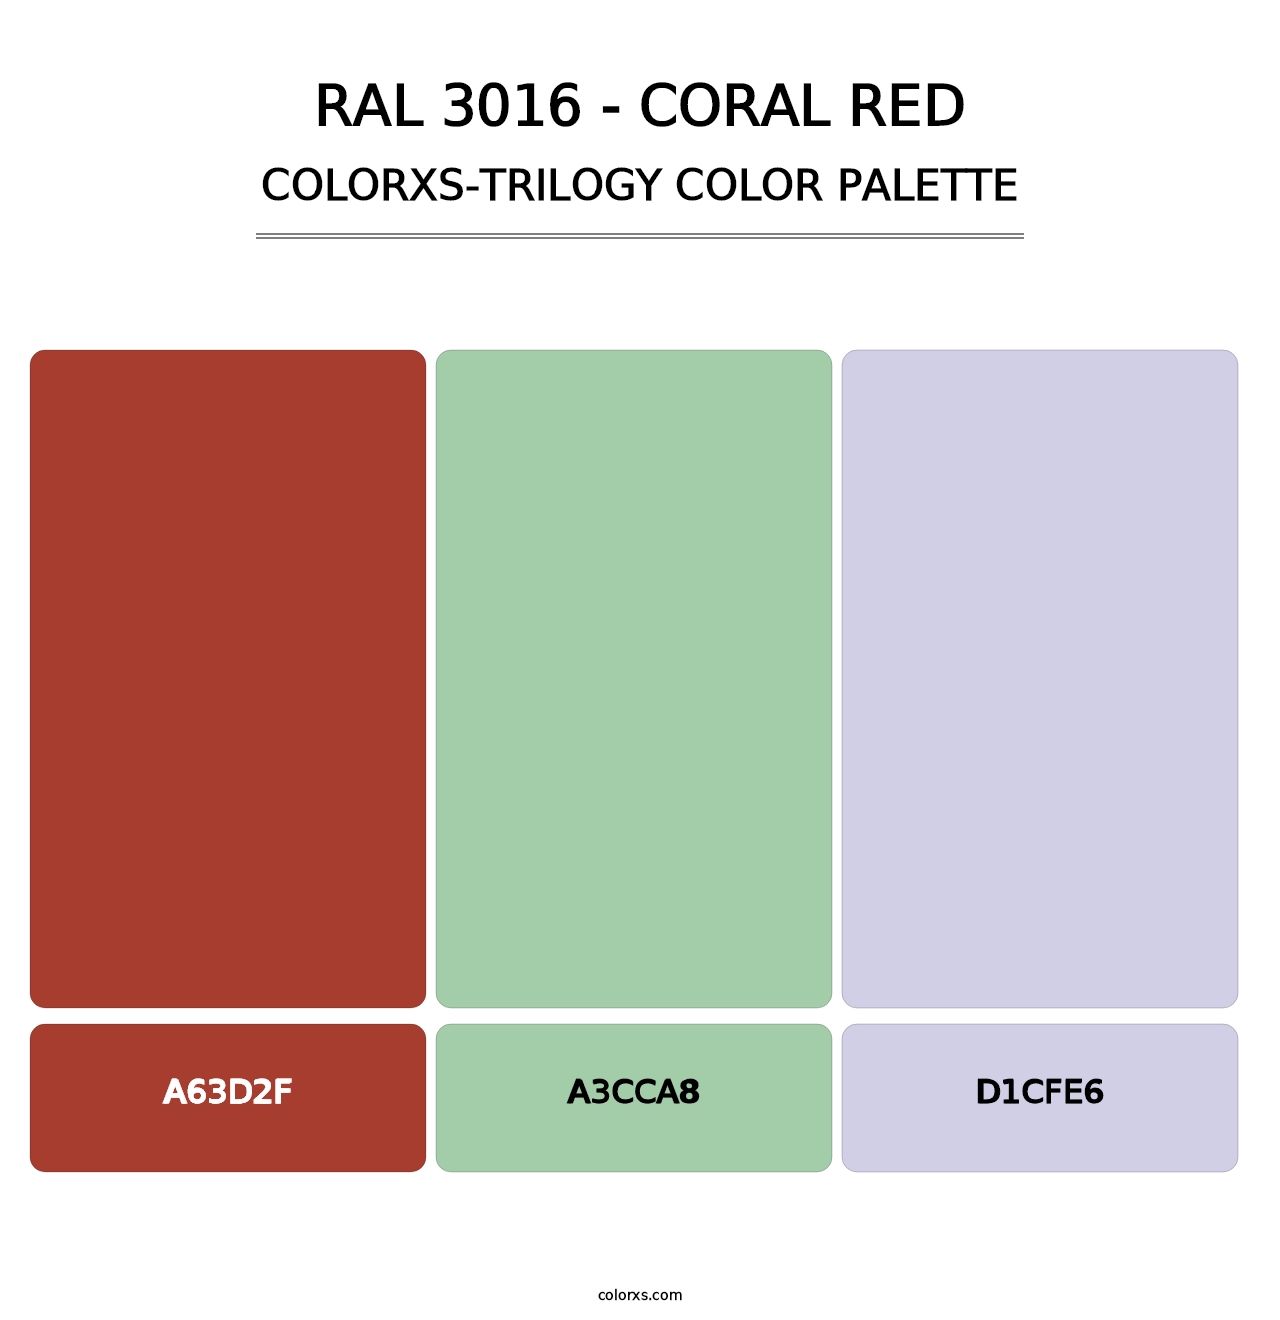 RAL 3016 - Coral Red - Colorxs Trilogy Palette